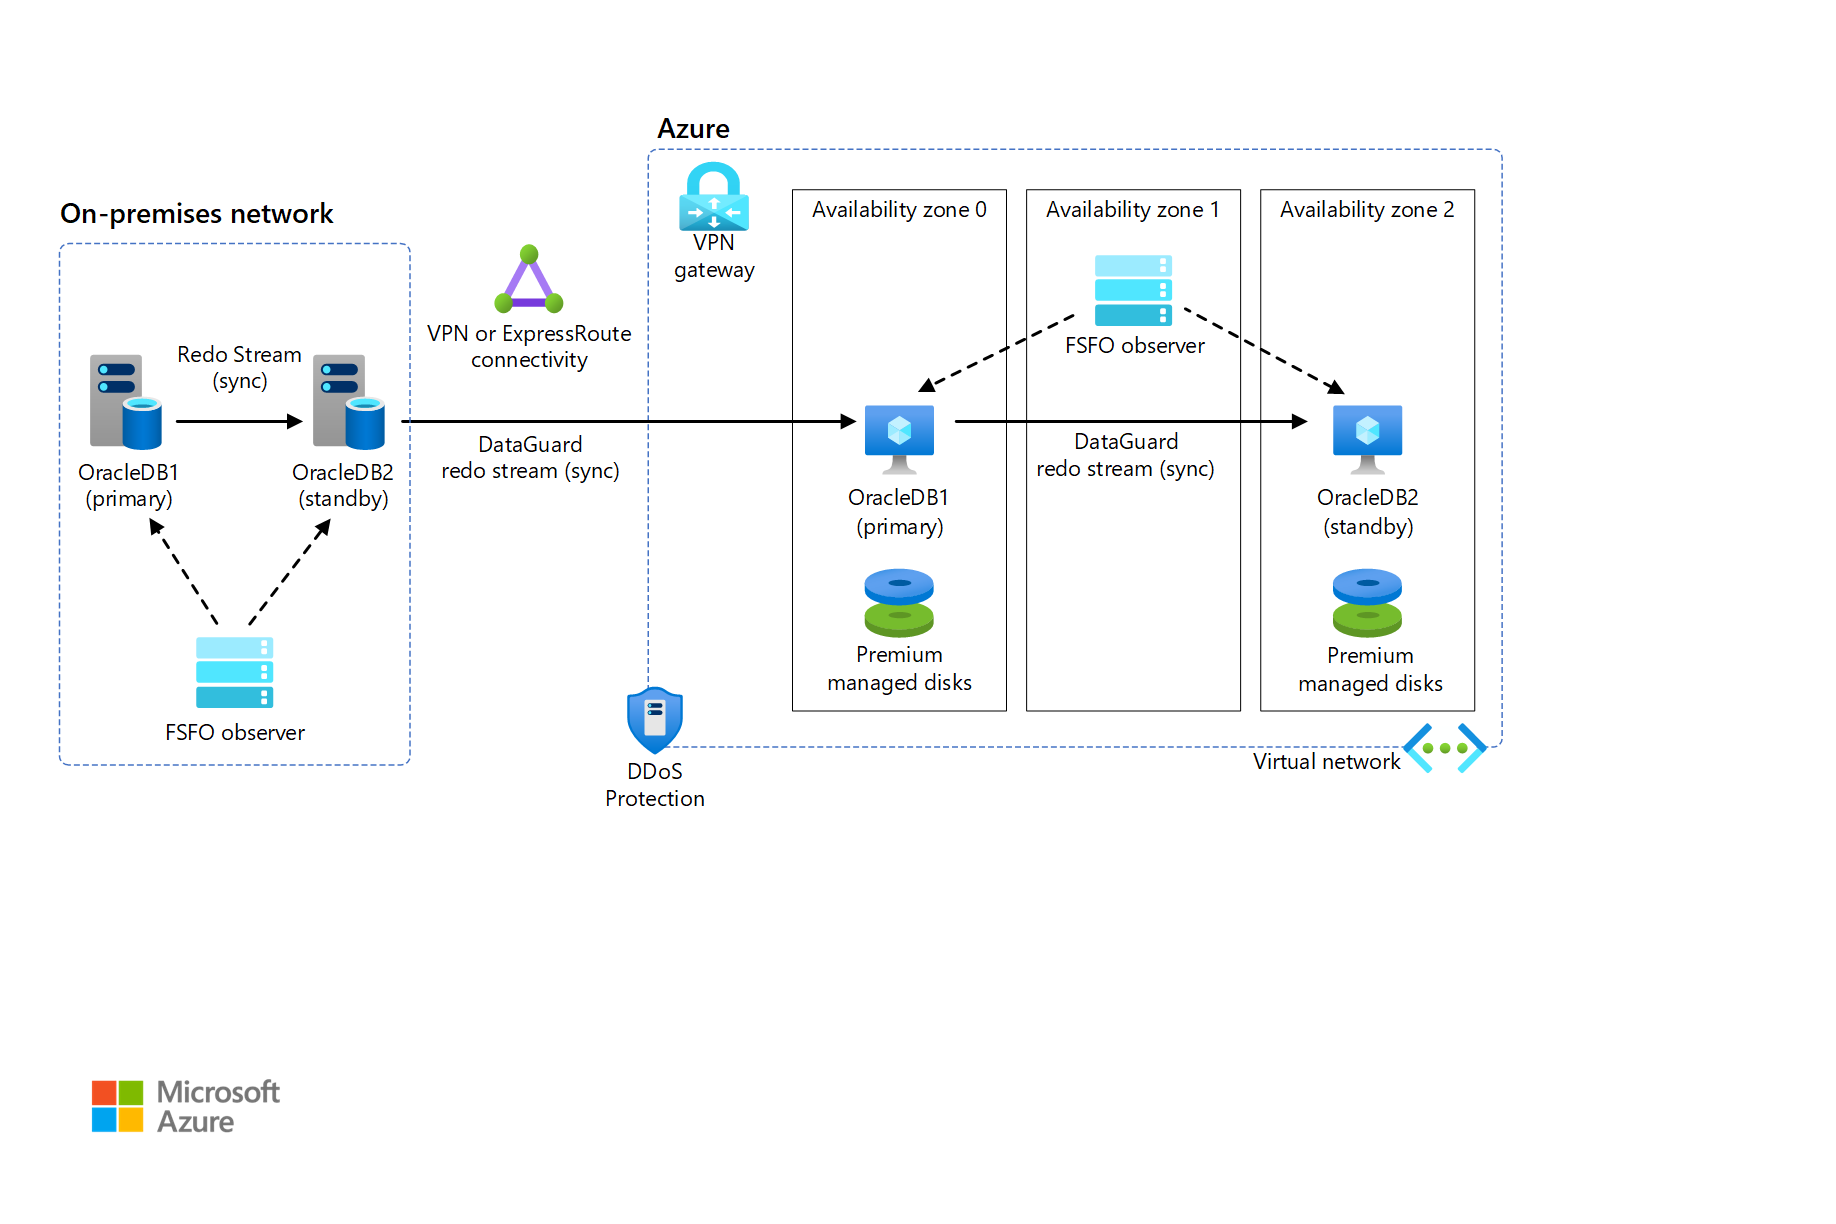 Thumbnail of Oracle Database Migration to Azure Architectural Diagram.